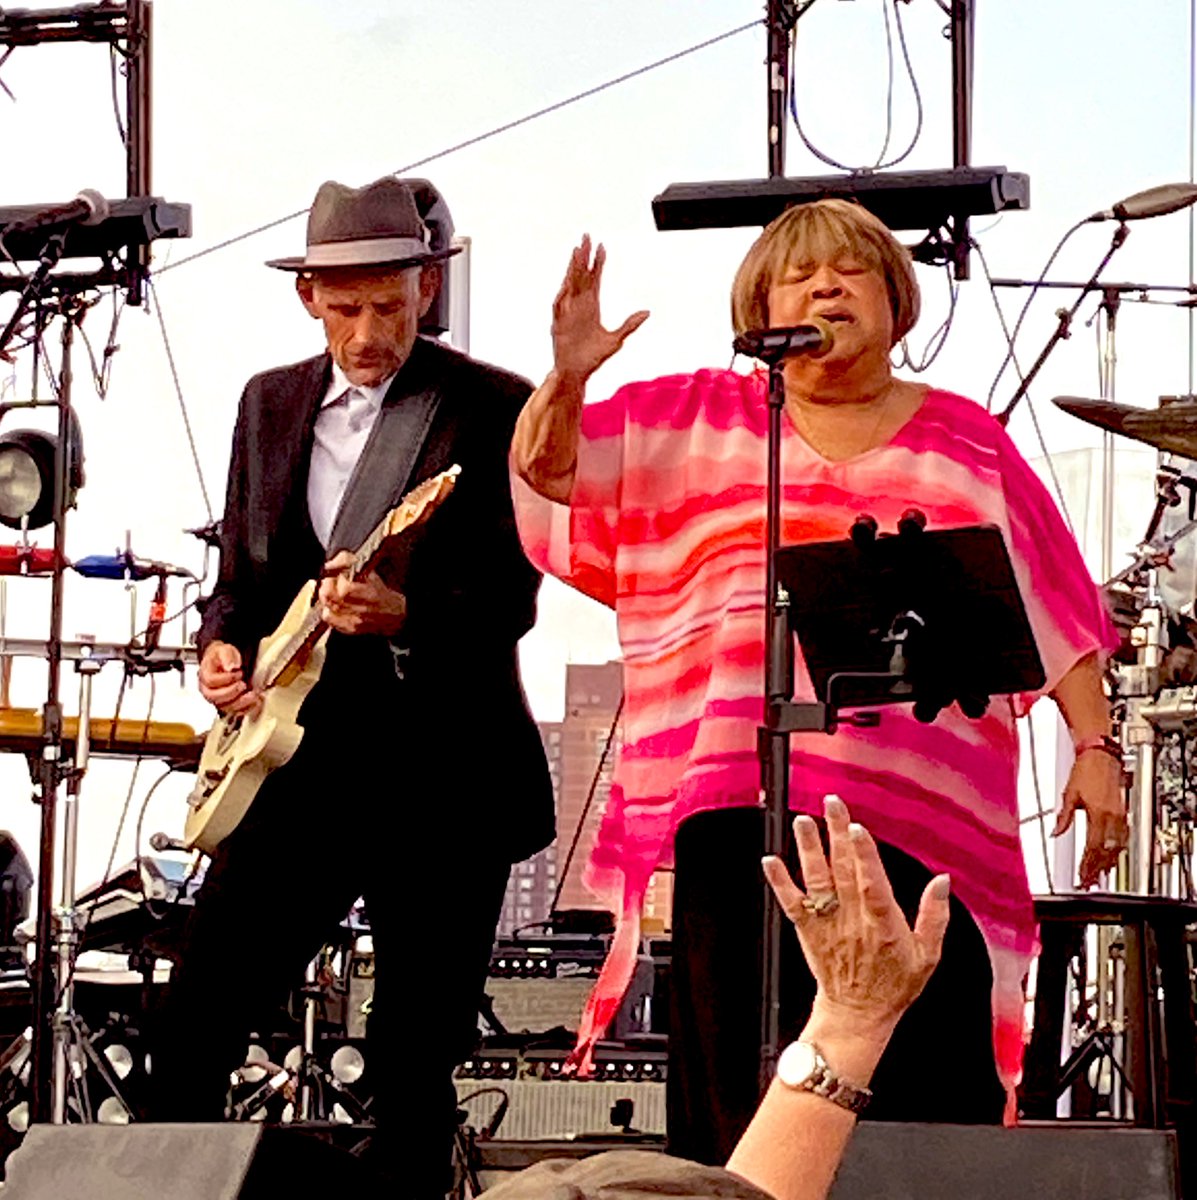 Missed seeing Mavis Staples four times during pandemic concert chaos but last night I finally got to hear a legend live on stage.